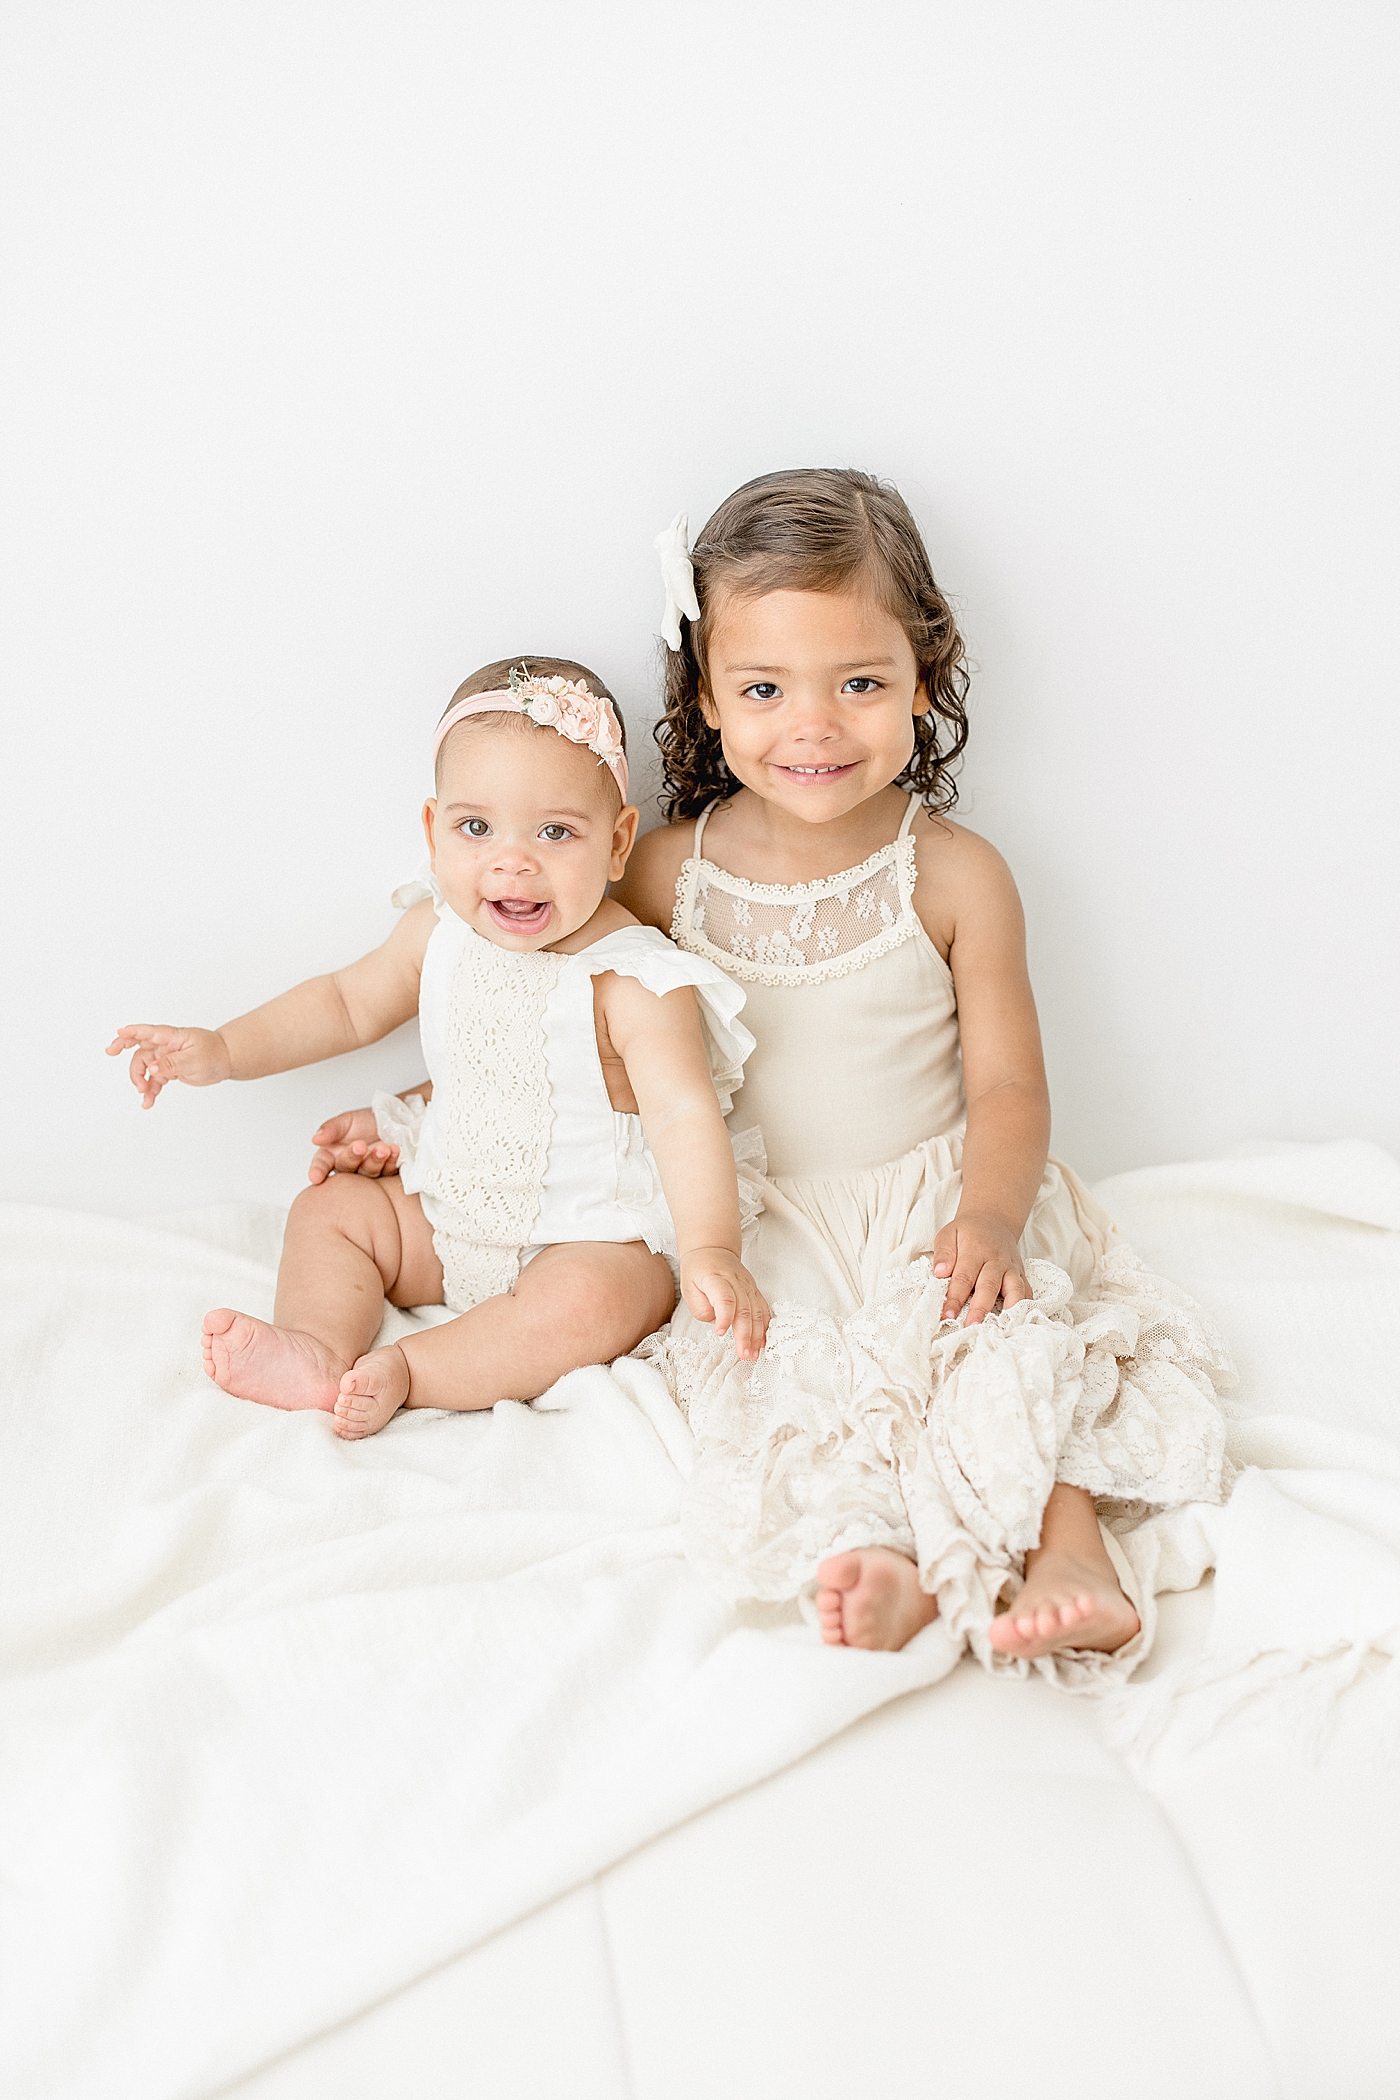 Two sisters sitting together for photos during milestone session. Photo by Brittany Elise Photography.